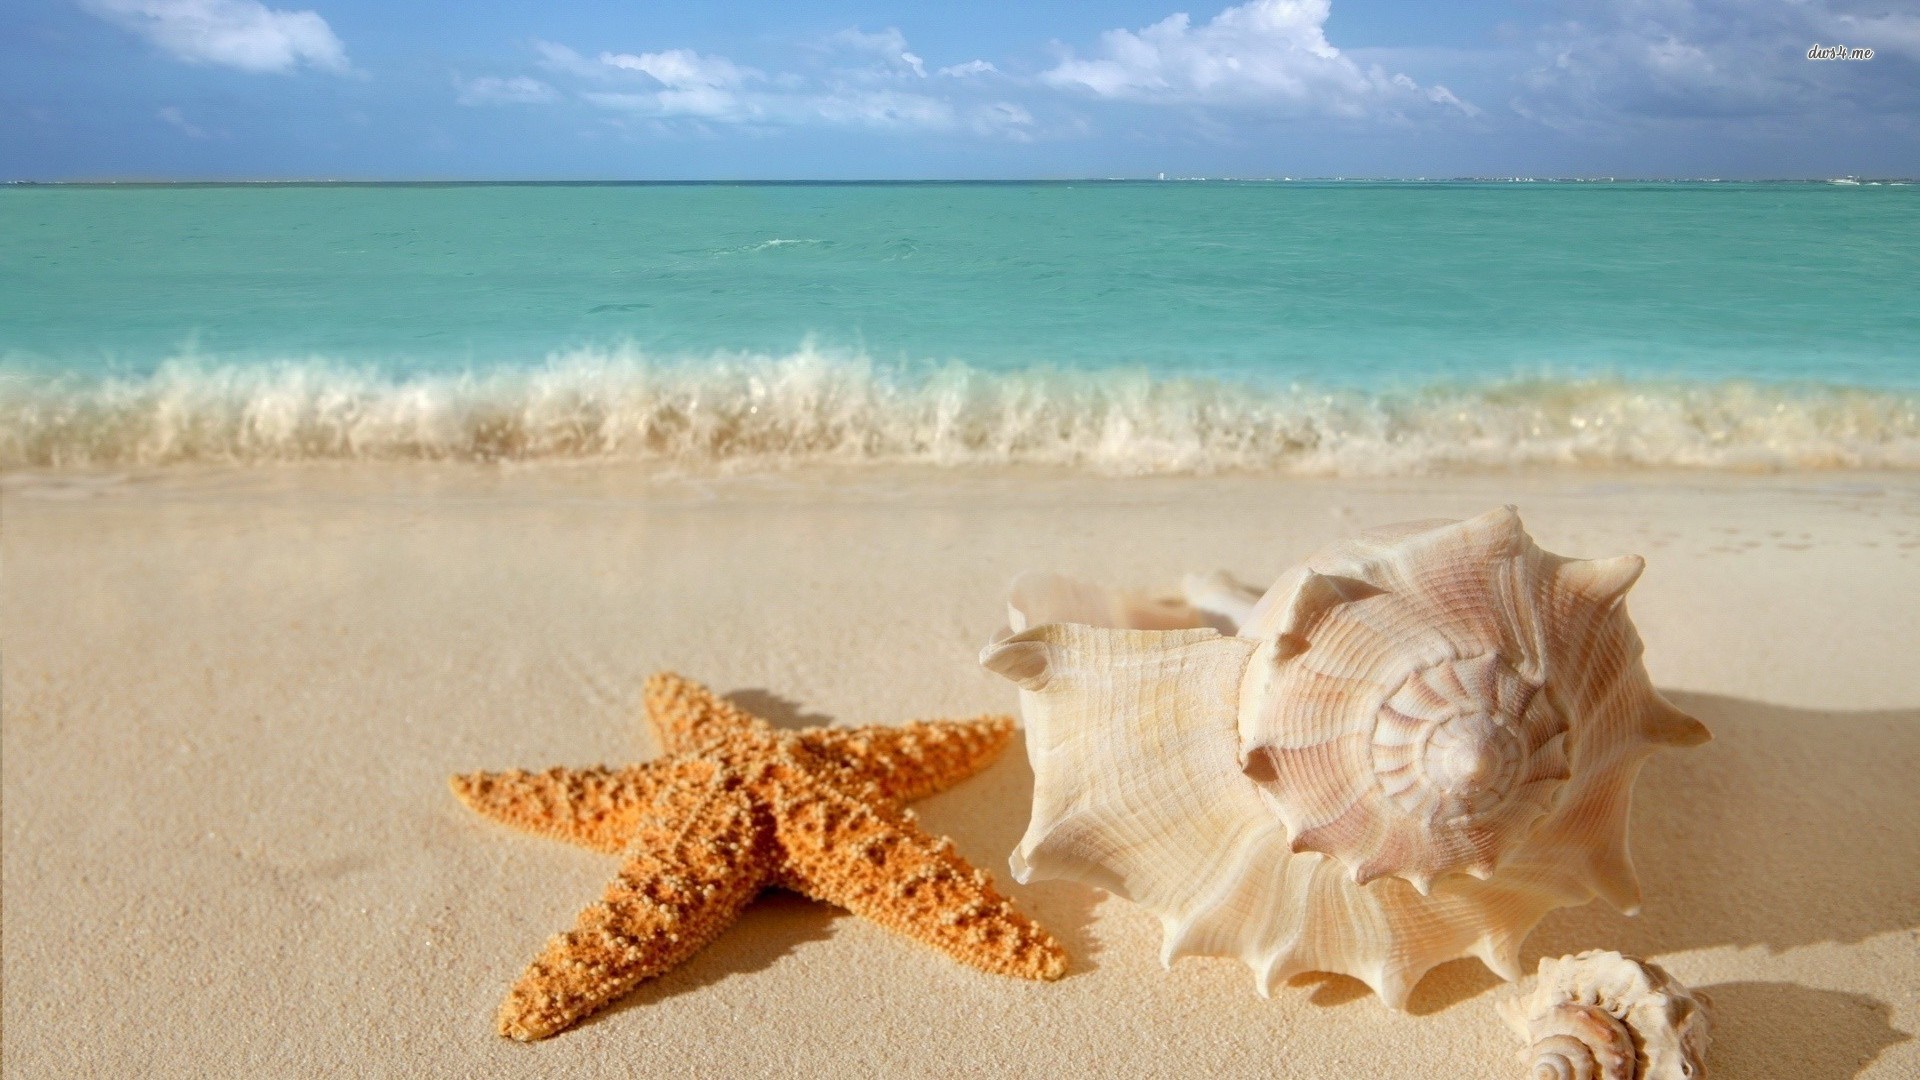 1920x1080 Beach Shells Pictures | Starfish and shells on the beach wallpaper